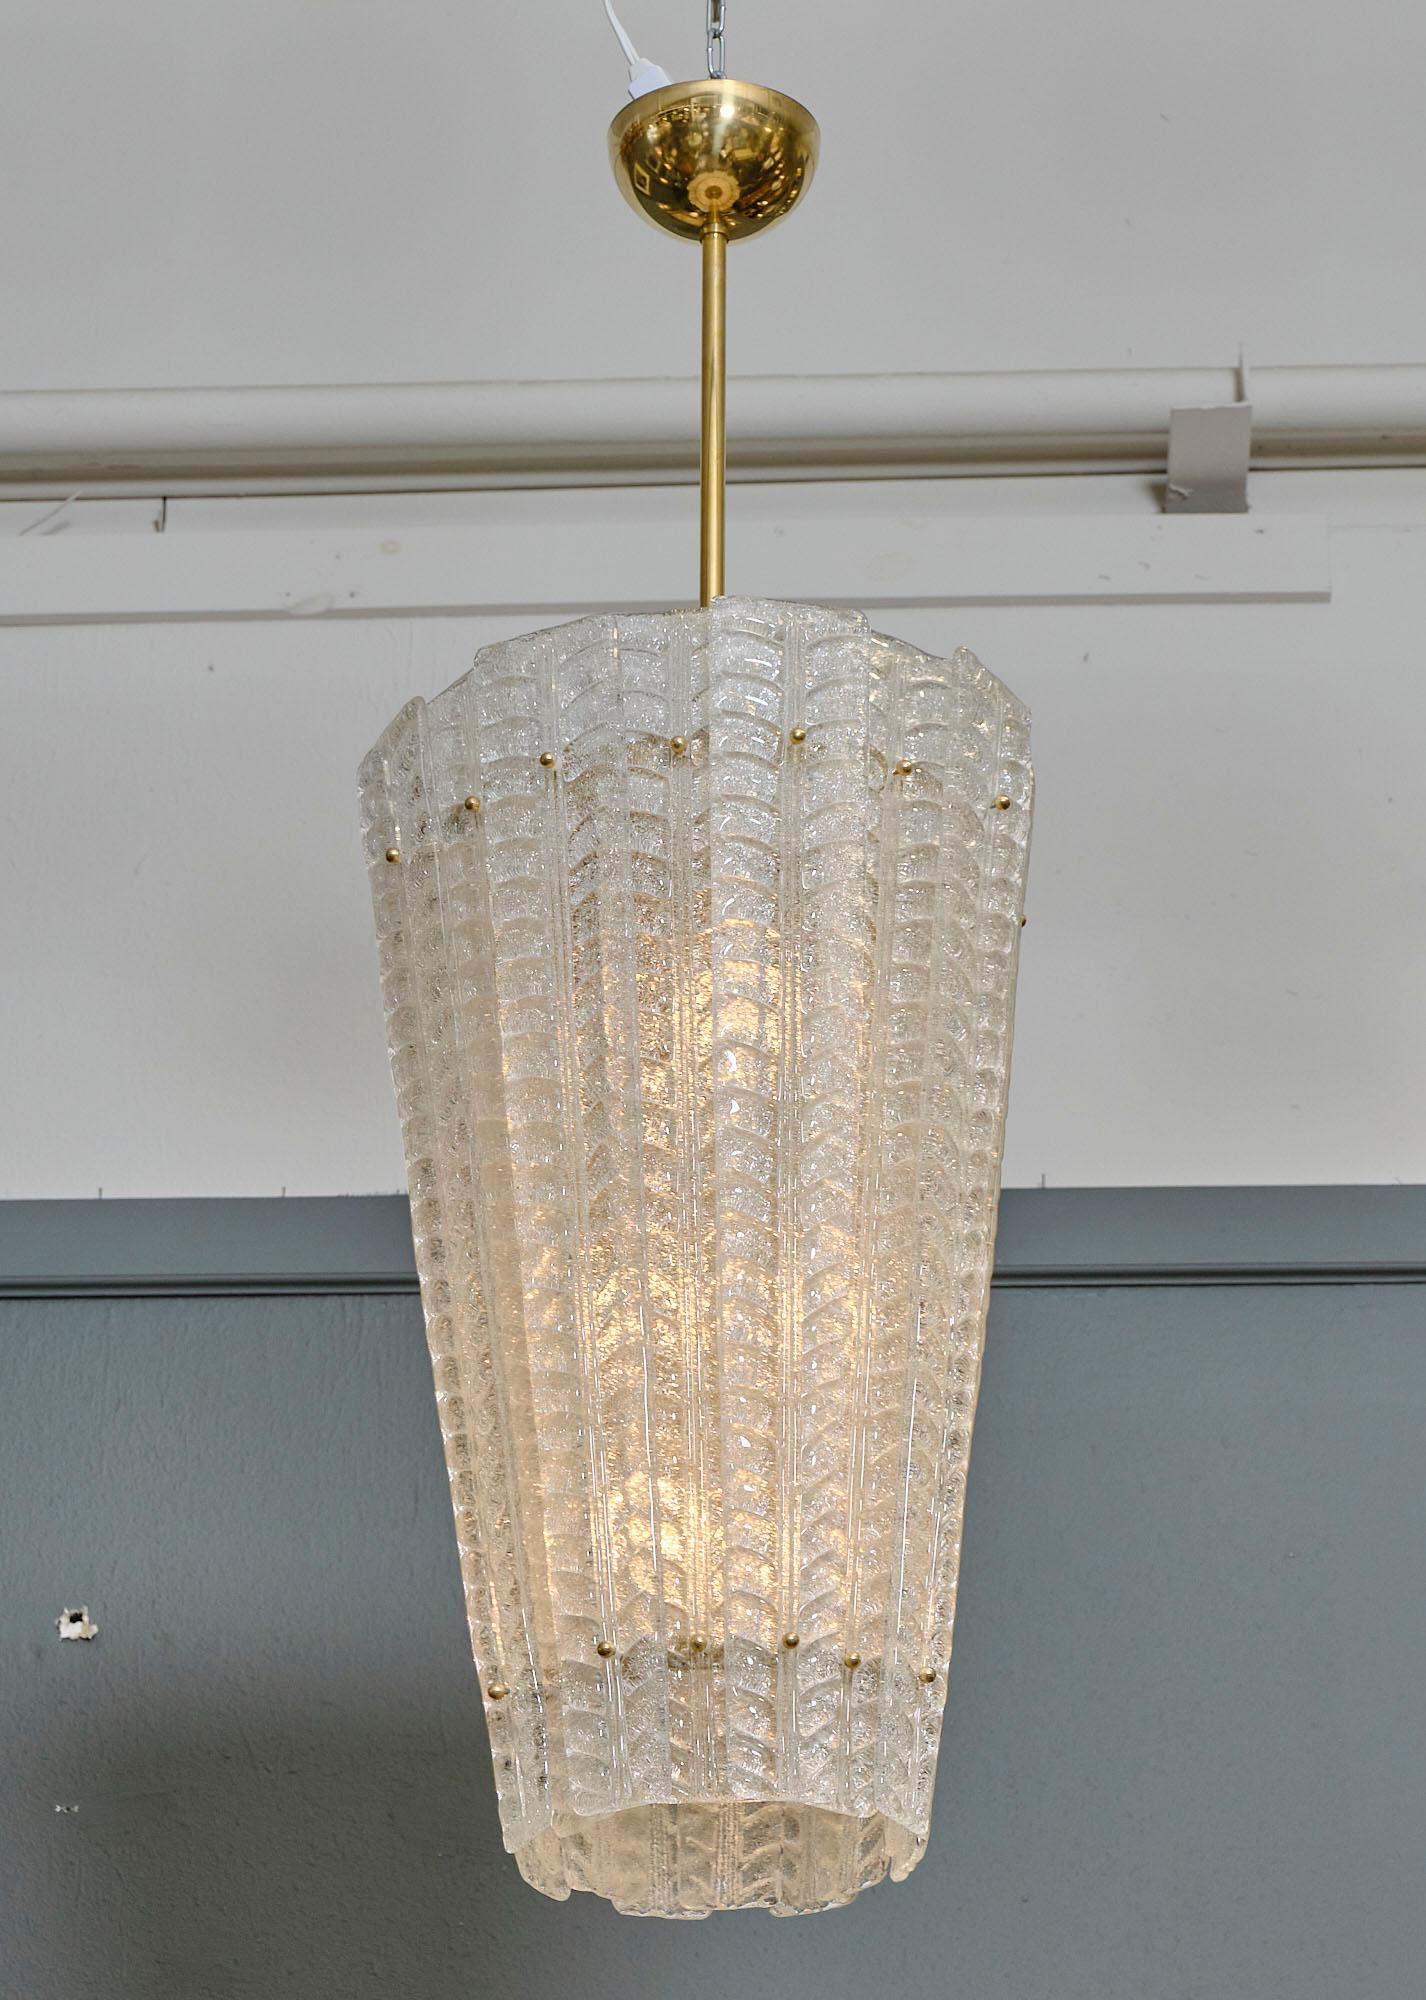 Lantern, from the island of Murano, ”Pulegoso” glass blades are attached to a gilt brass structure to form this stunning fixture.